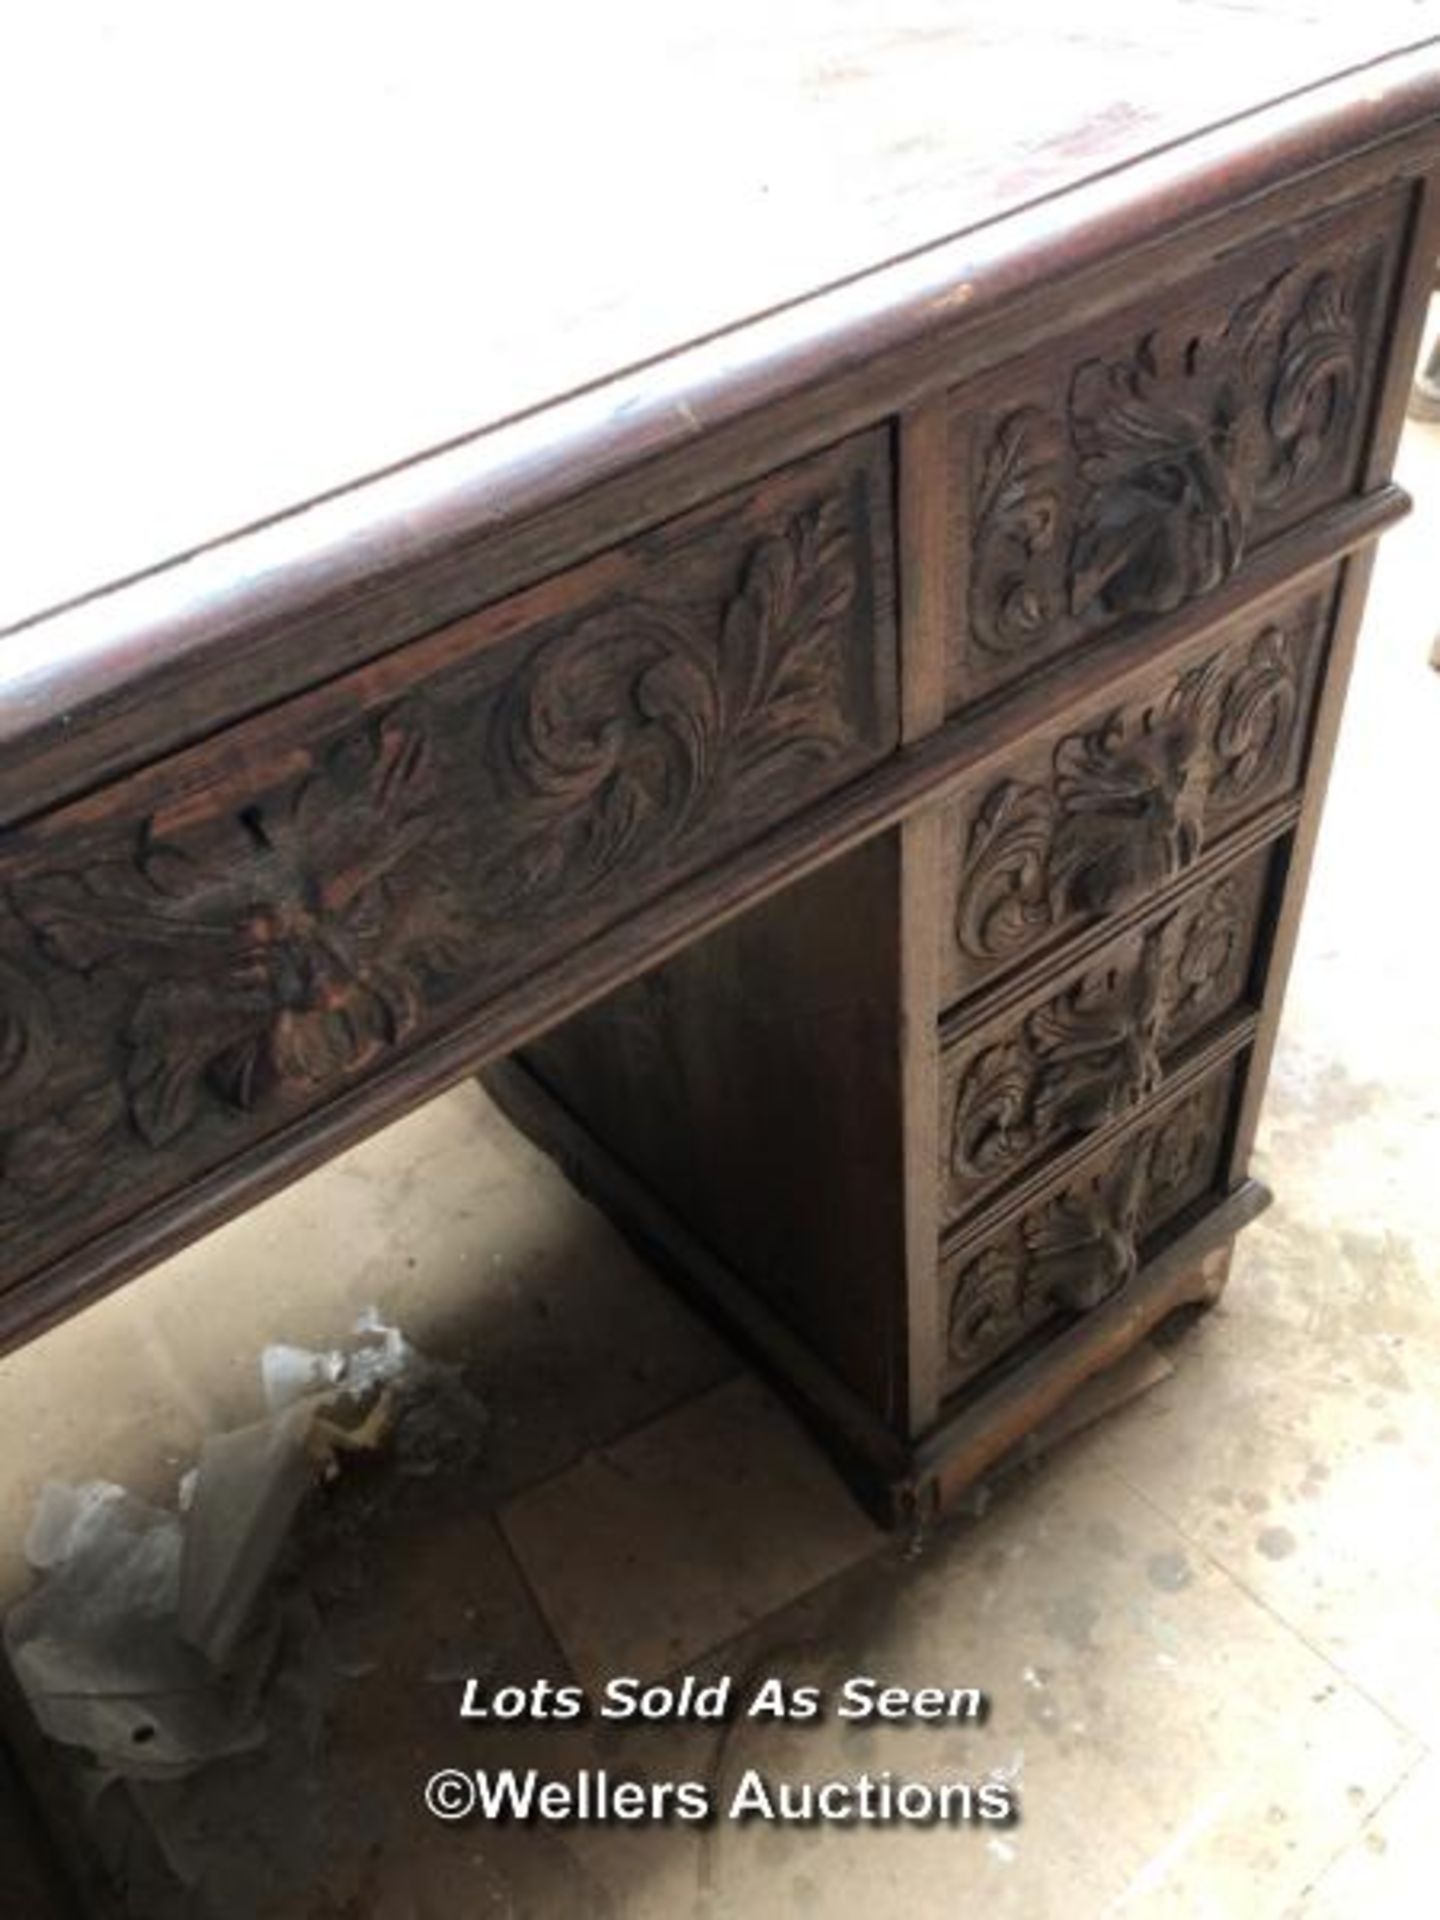 OAK CARVED DESK WITH NINE DRAWERS, 41.5 X 28.5 X 29.5 INCHES / LOCATED AT VICTORIA ANTIQUES, - Image 5 of 7